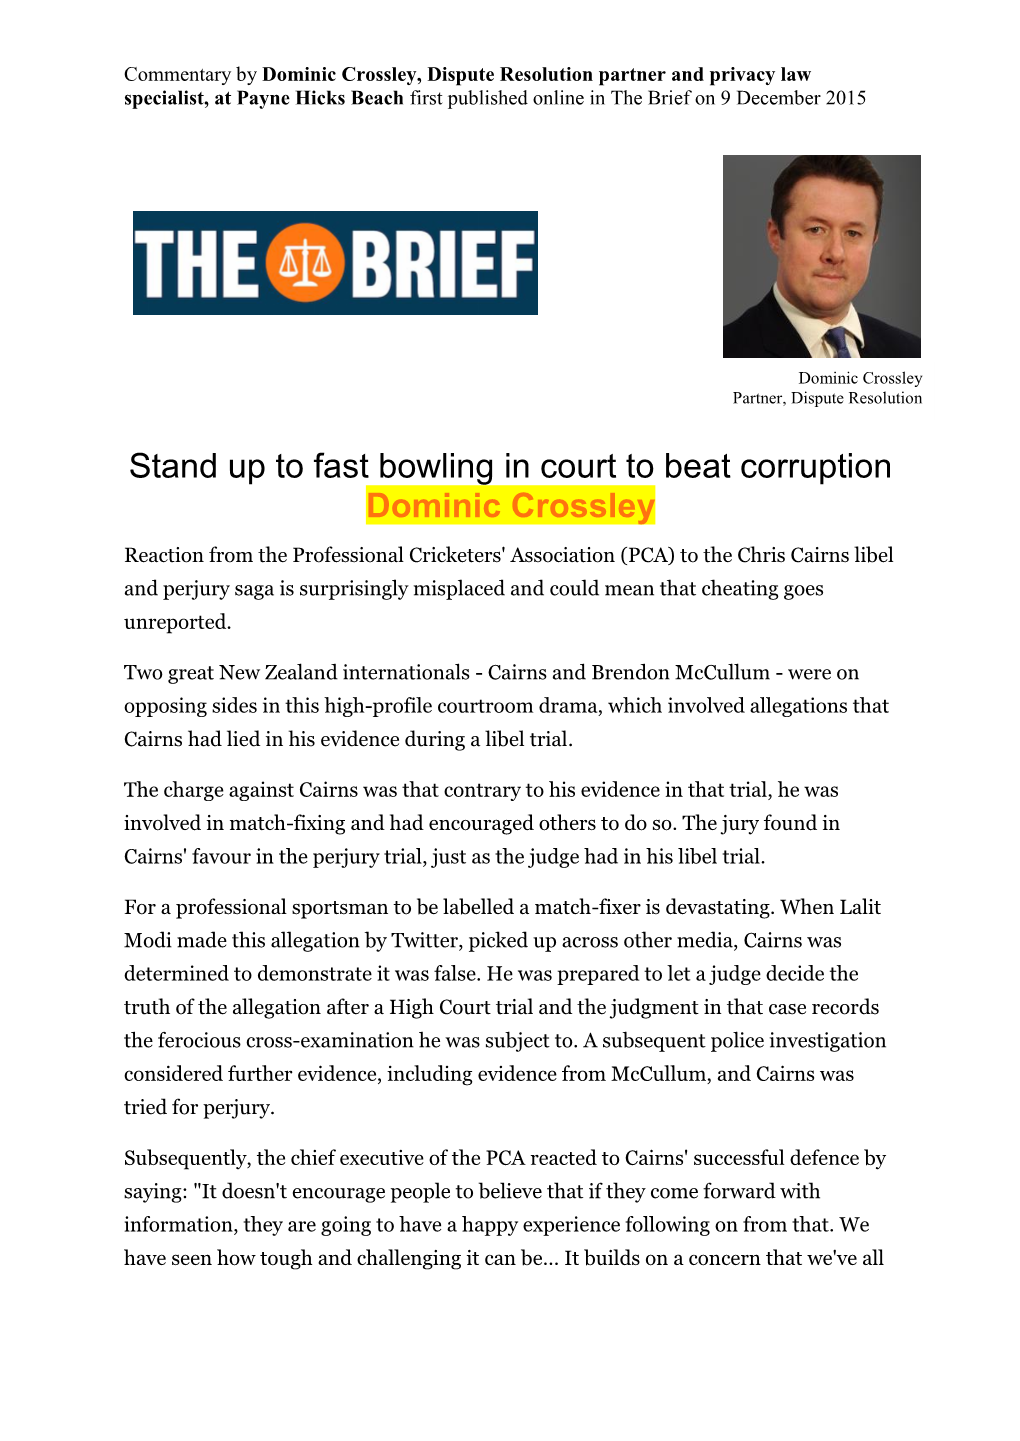 Stand up to Fast Bowling in Court to Beat Corruption Dominic Crossley